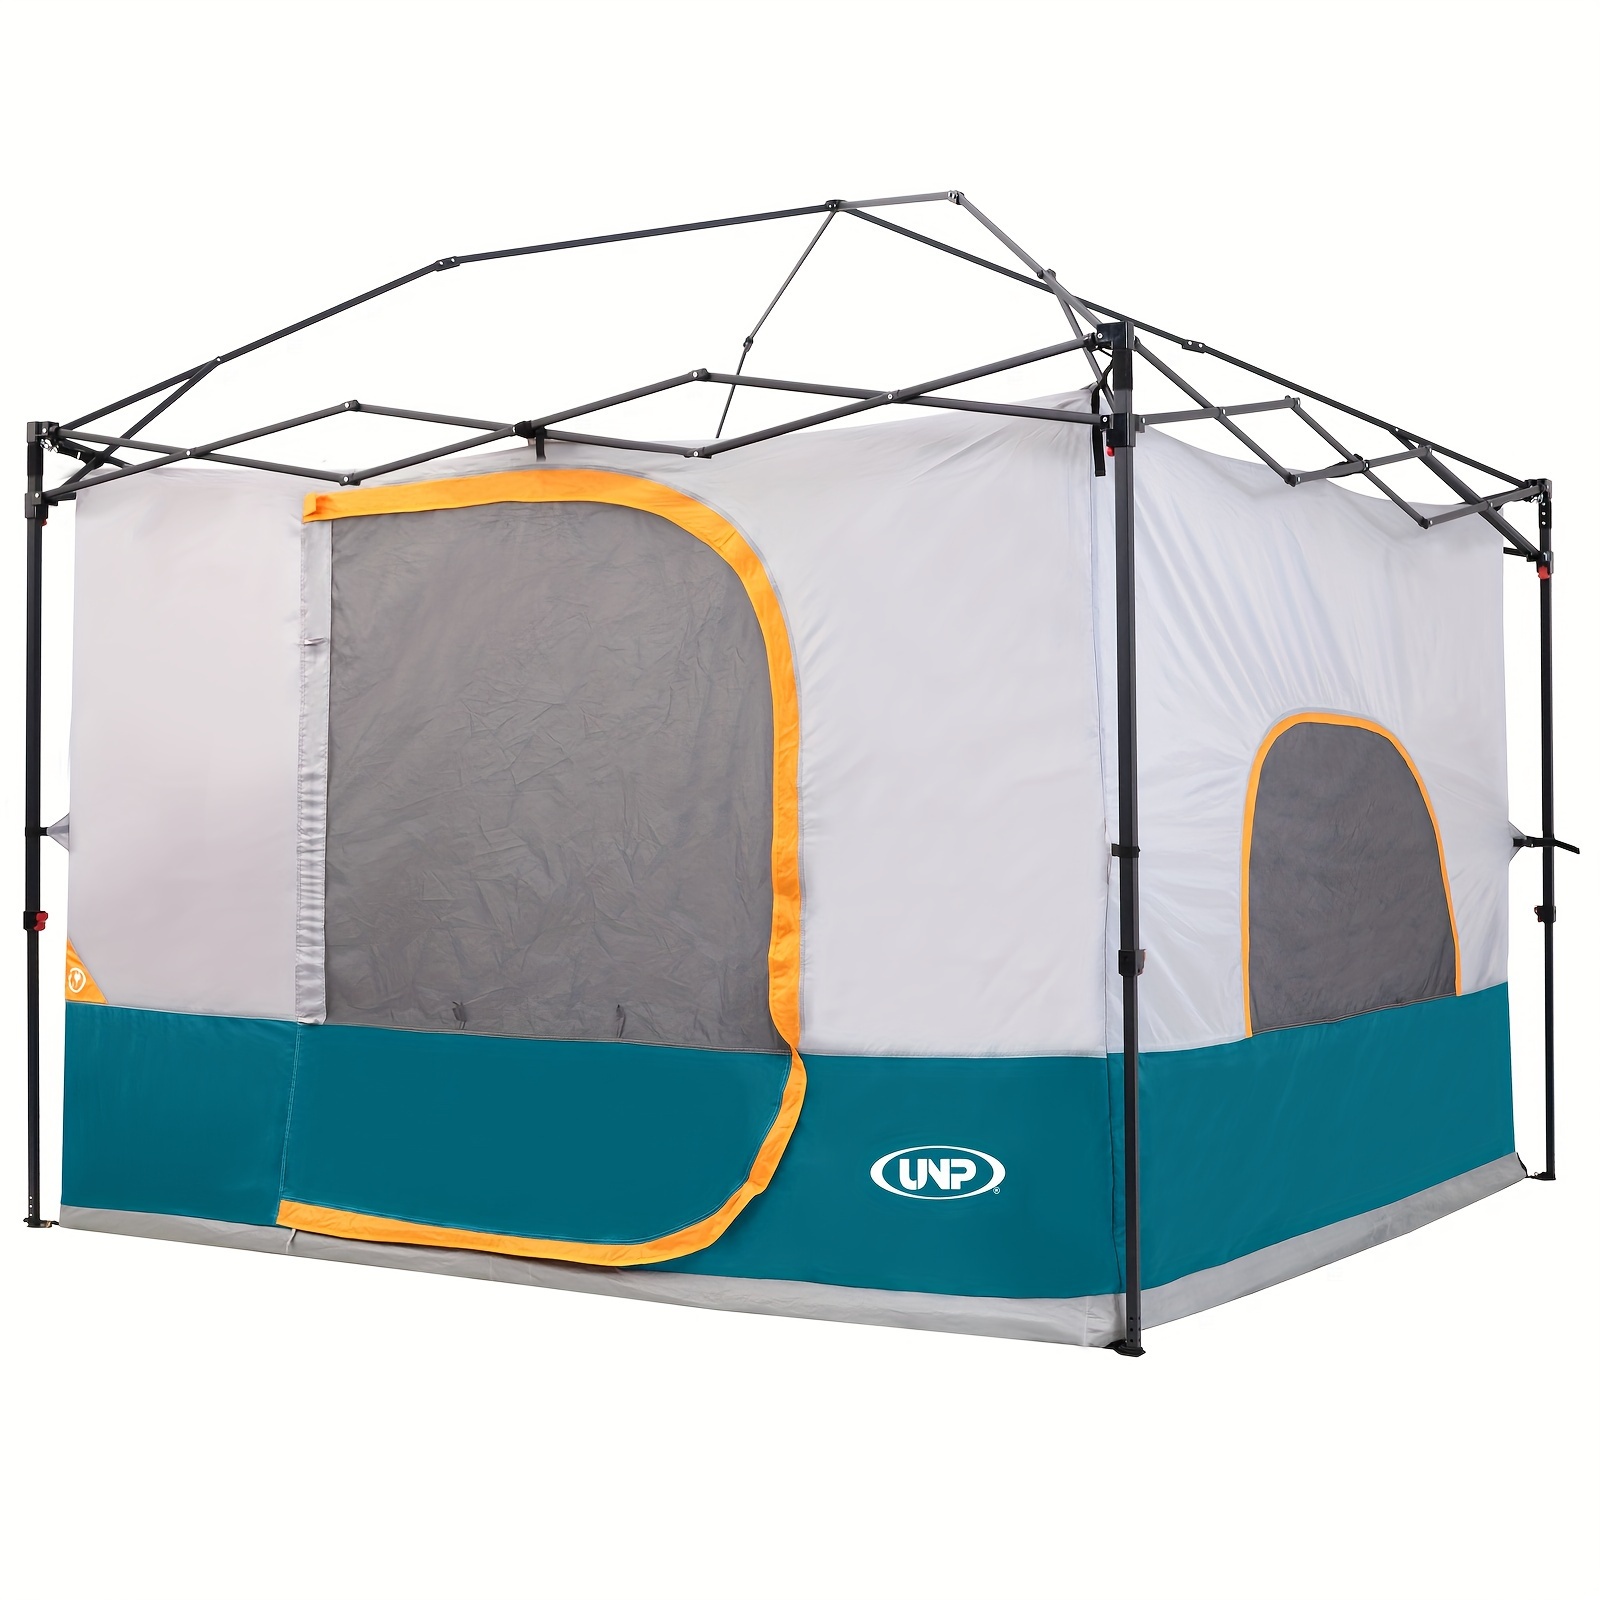 

Unp Camping Cube - Inner Tent For 10' X 10' Pop Up Canopy, Easy Setup, Fully Vented Roof, Enclosed Canopy Space, Ocean Blue (frame Not Included)